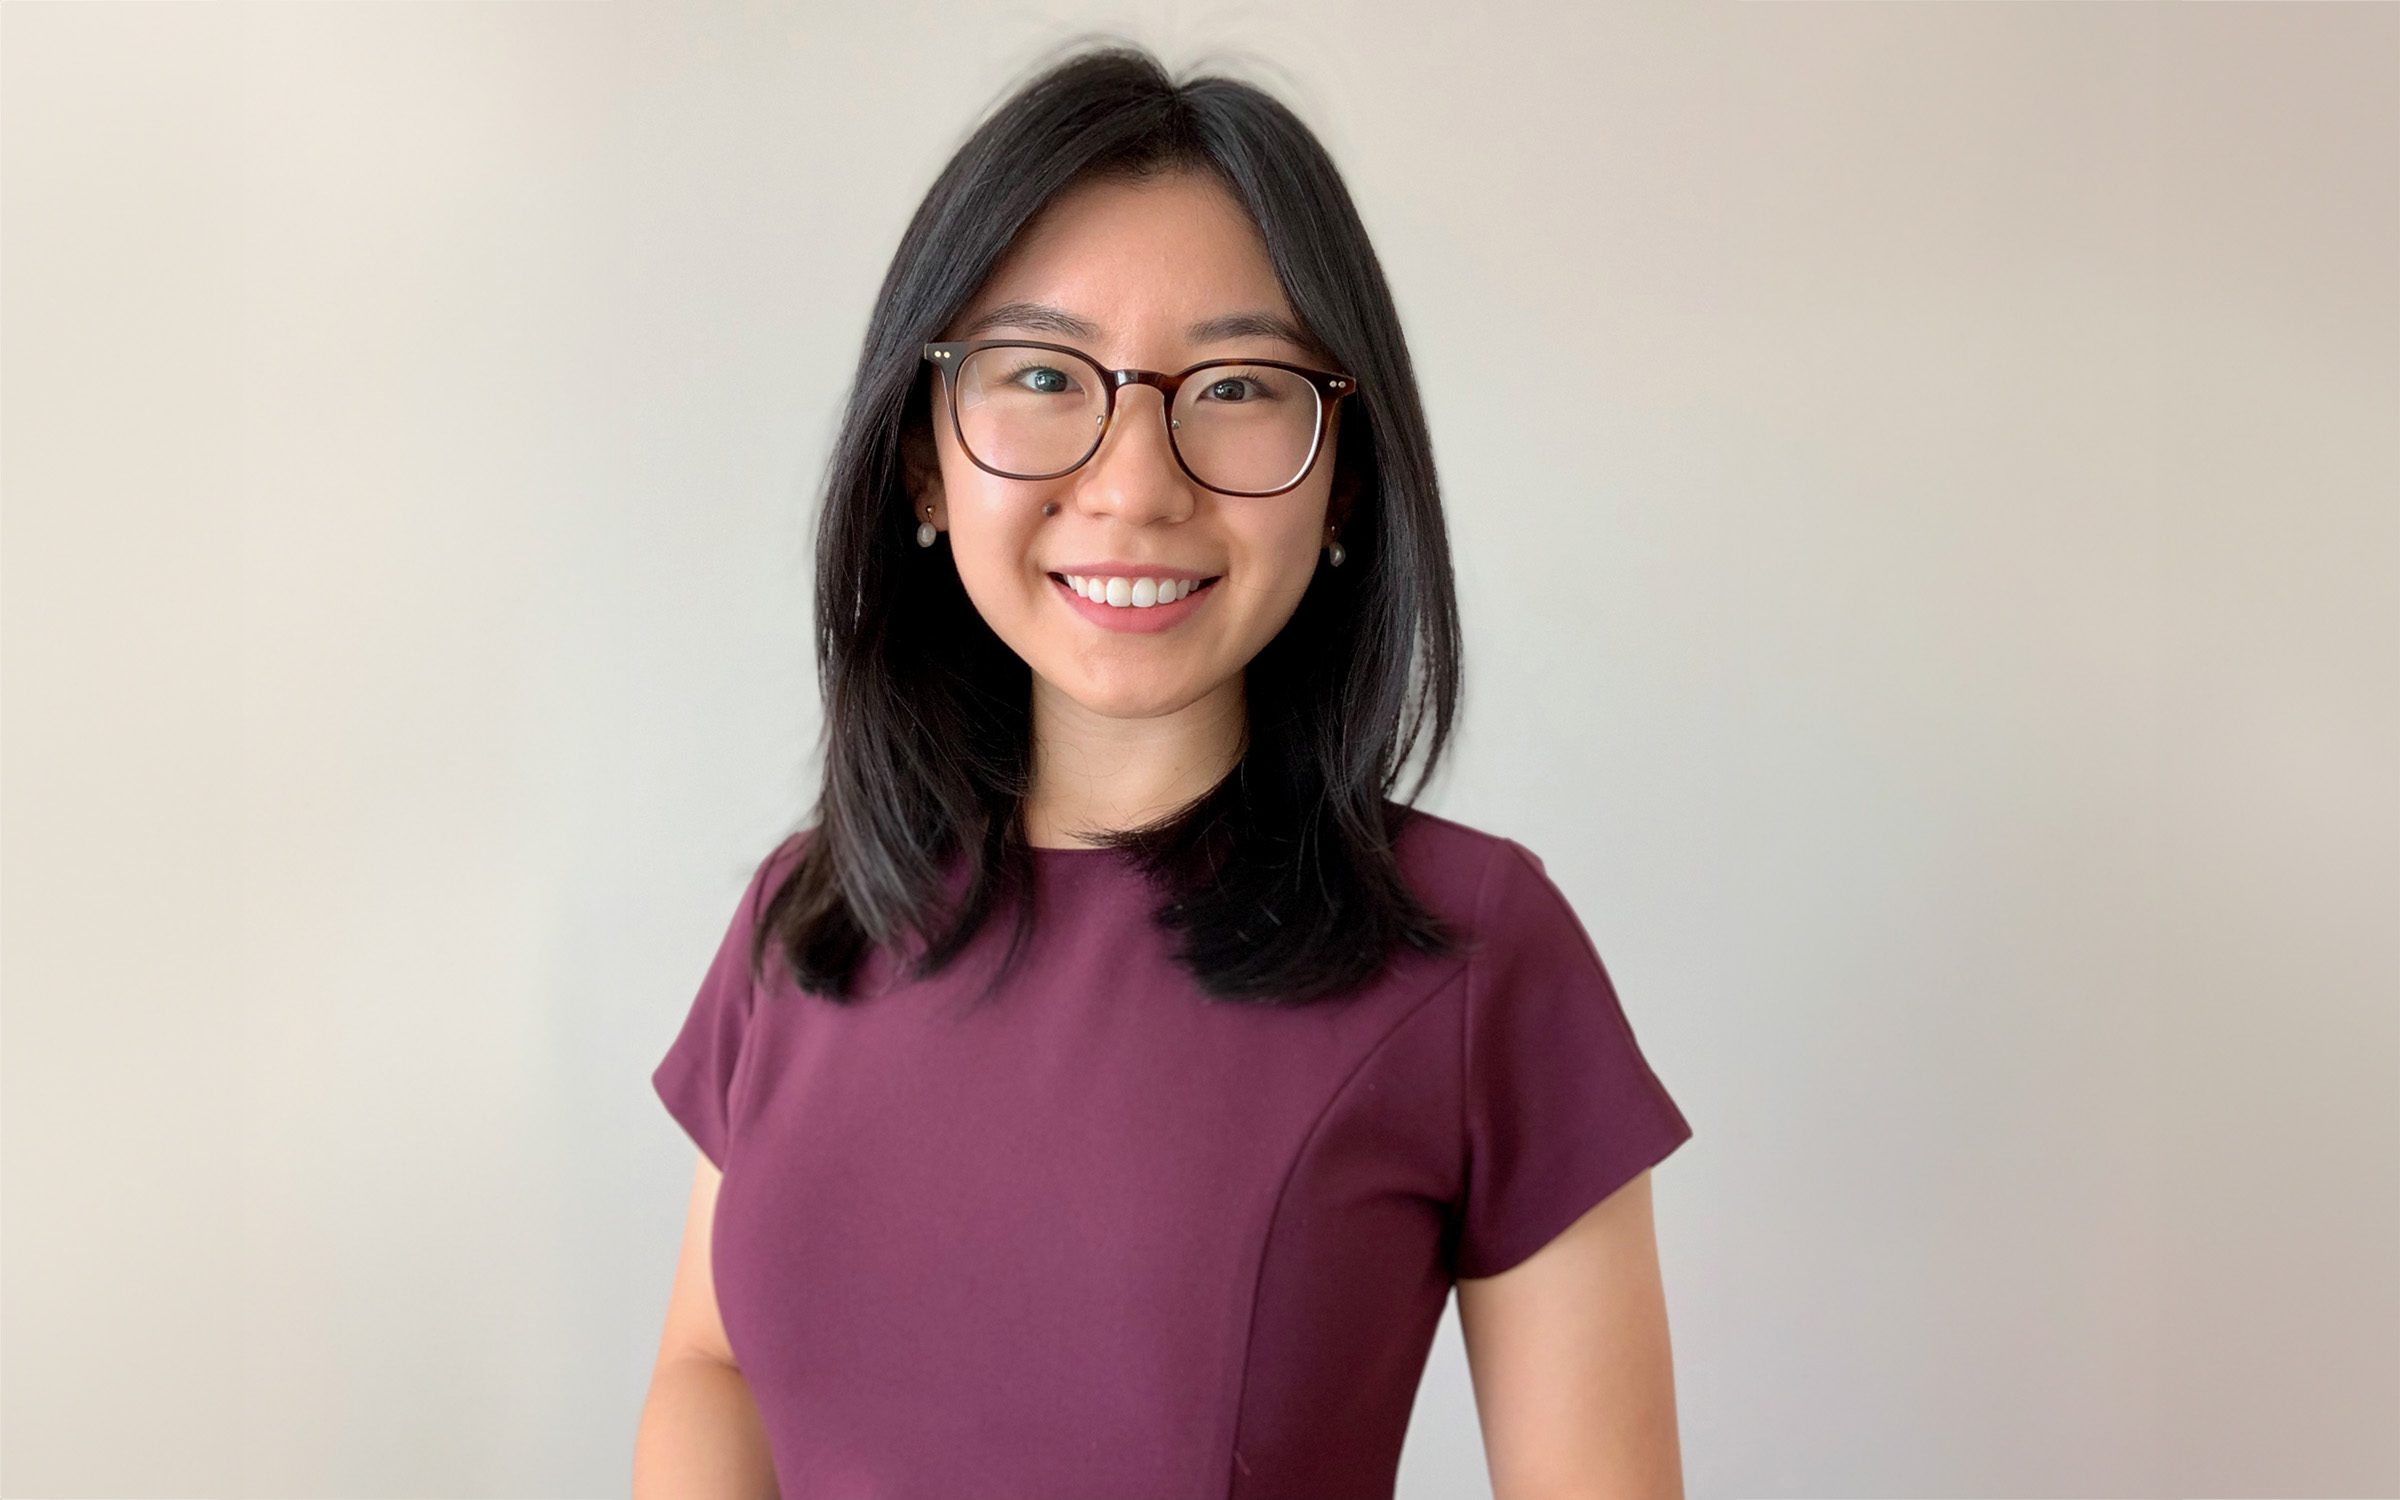 Sherry Wu (MPH ’23) Awarded APHA’s Masters Student Research Award in Aging and Public Health